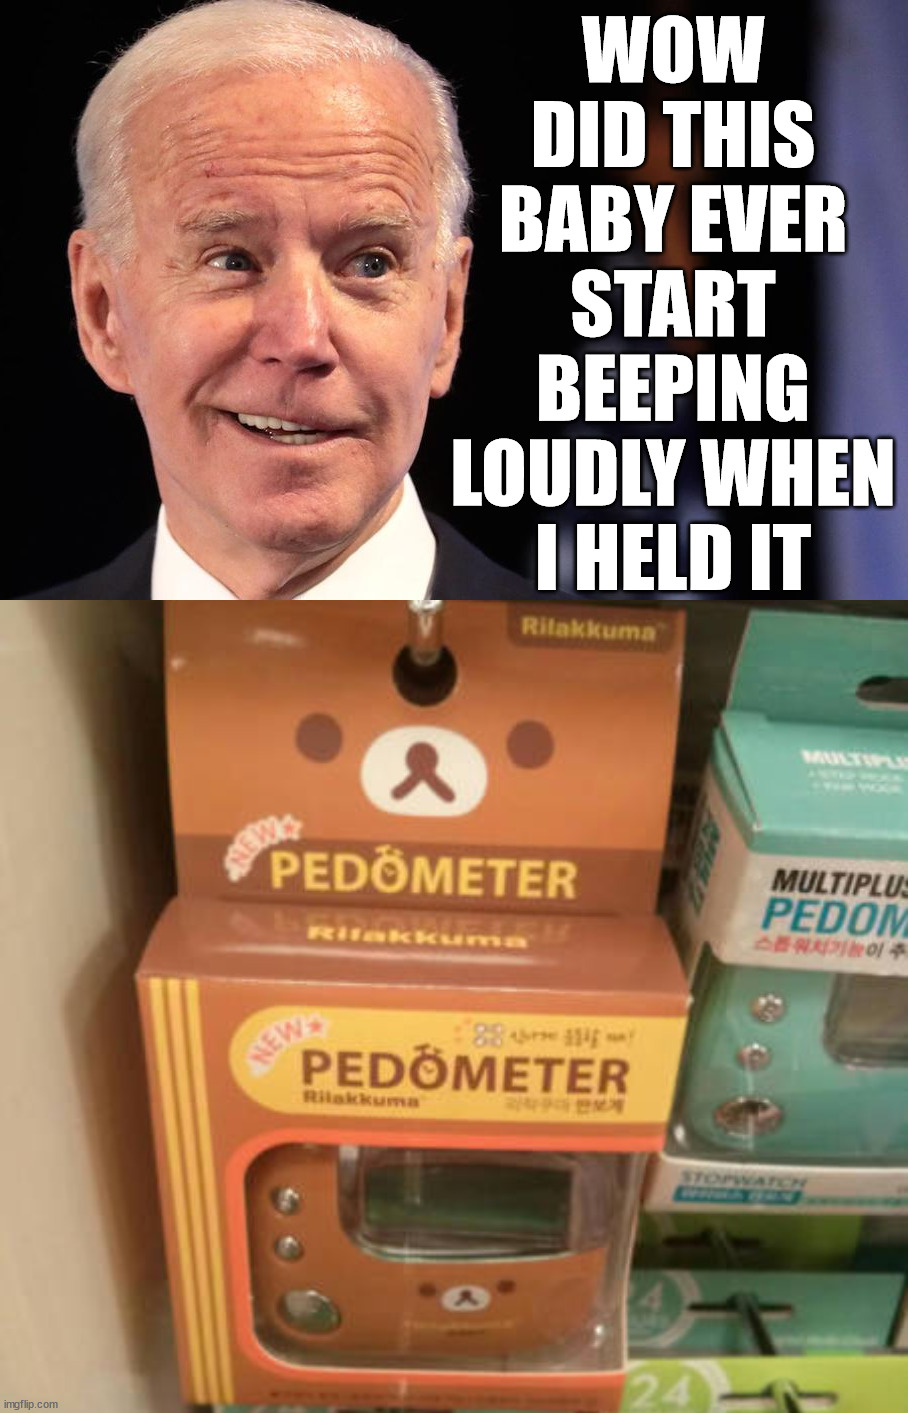 When the alarm sounds.... |  WOW DID THIS BABY EVER START BEEPING LOUDLY WHEN I HELD IT | image tagged in political meme,creepy joe biden,pedophile | made w/ Imgflip meme maker